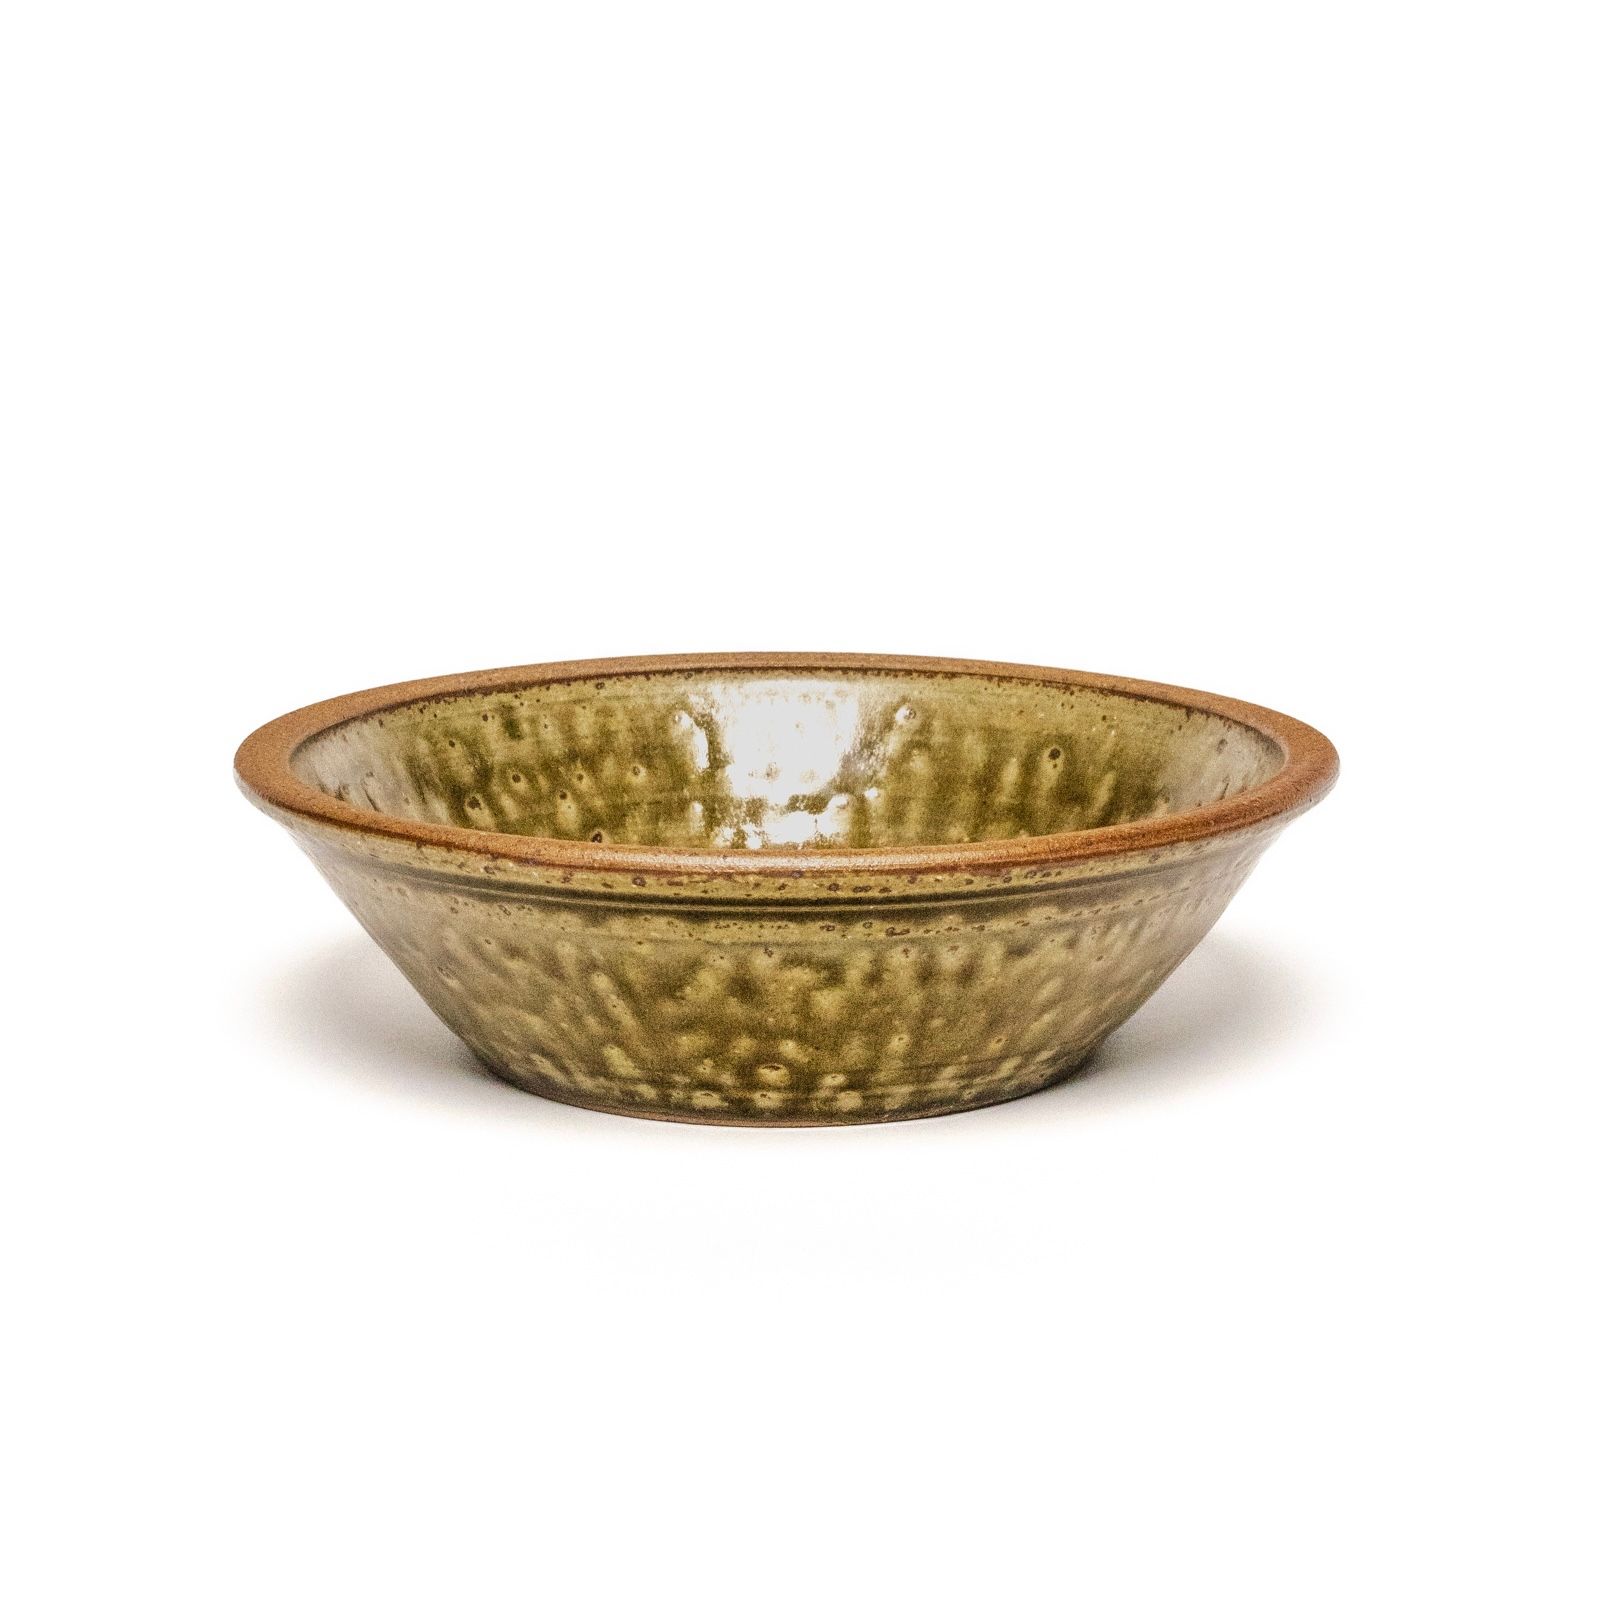 A short angular ceramic bowl in an earthy green and brown color with a slightly wide unglazed rim